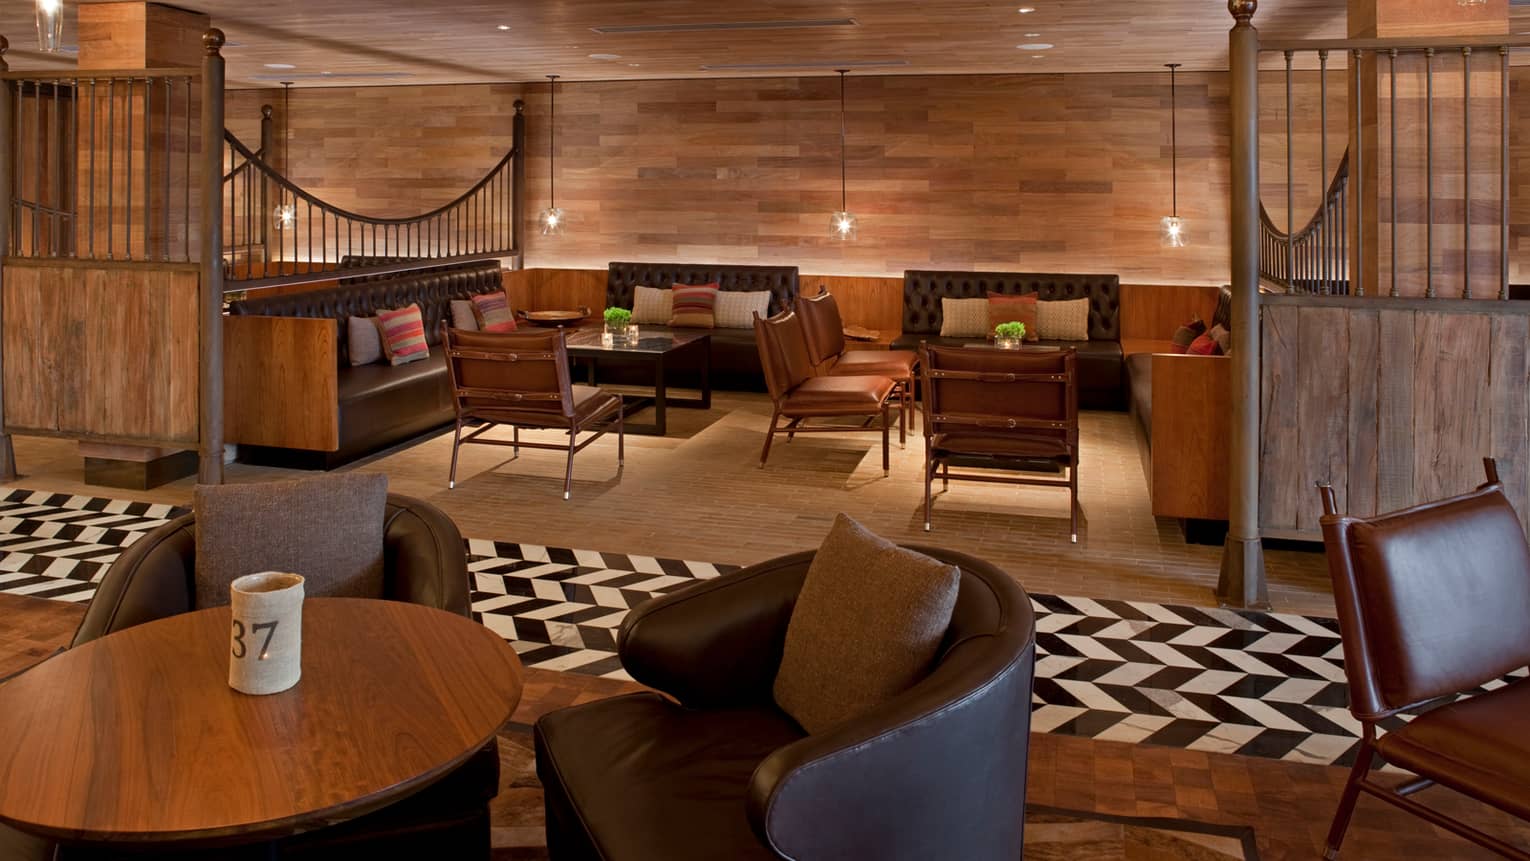 Pony Line lounge with rich brown wood flooring and walls over tables with stools, leather chairs, glass lamps